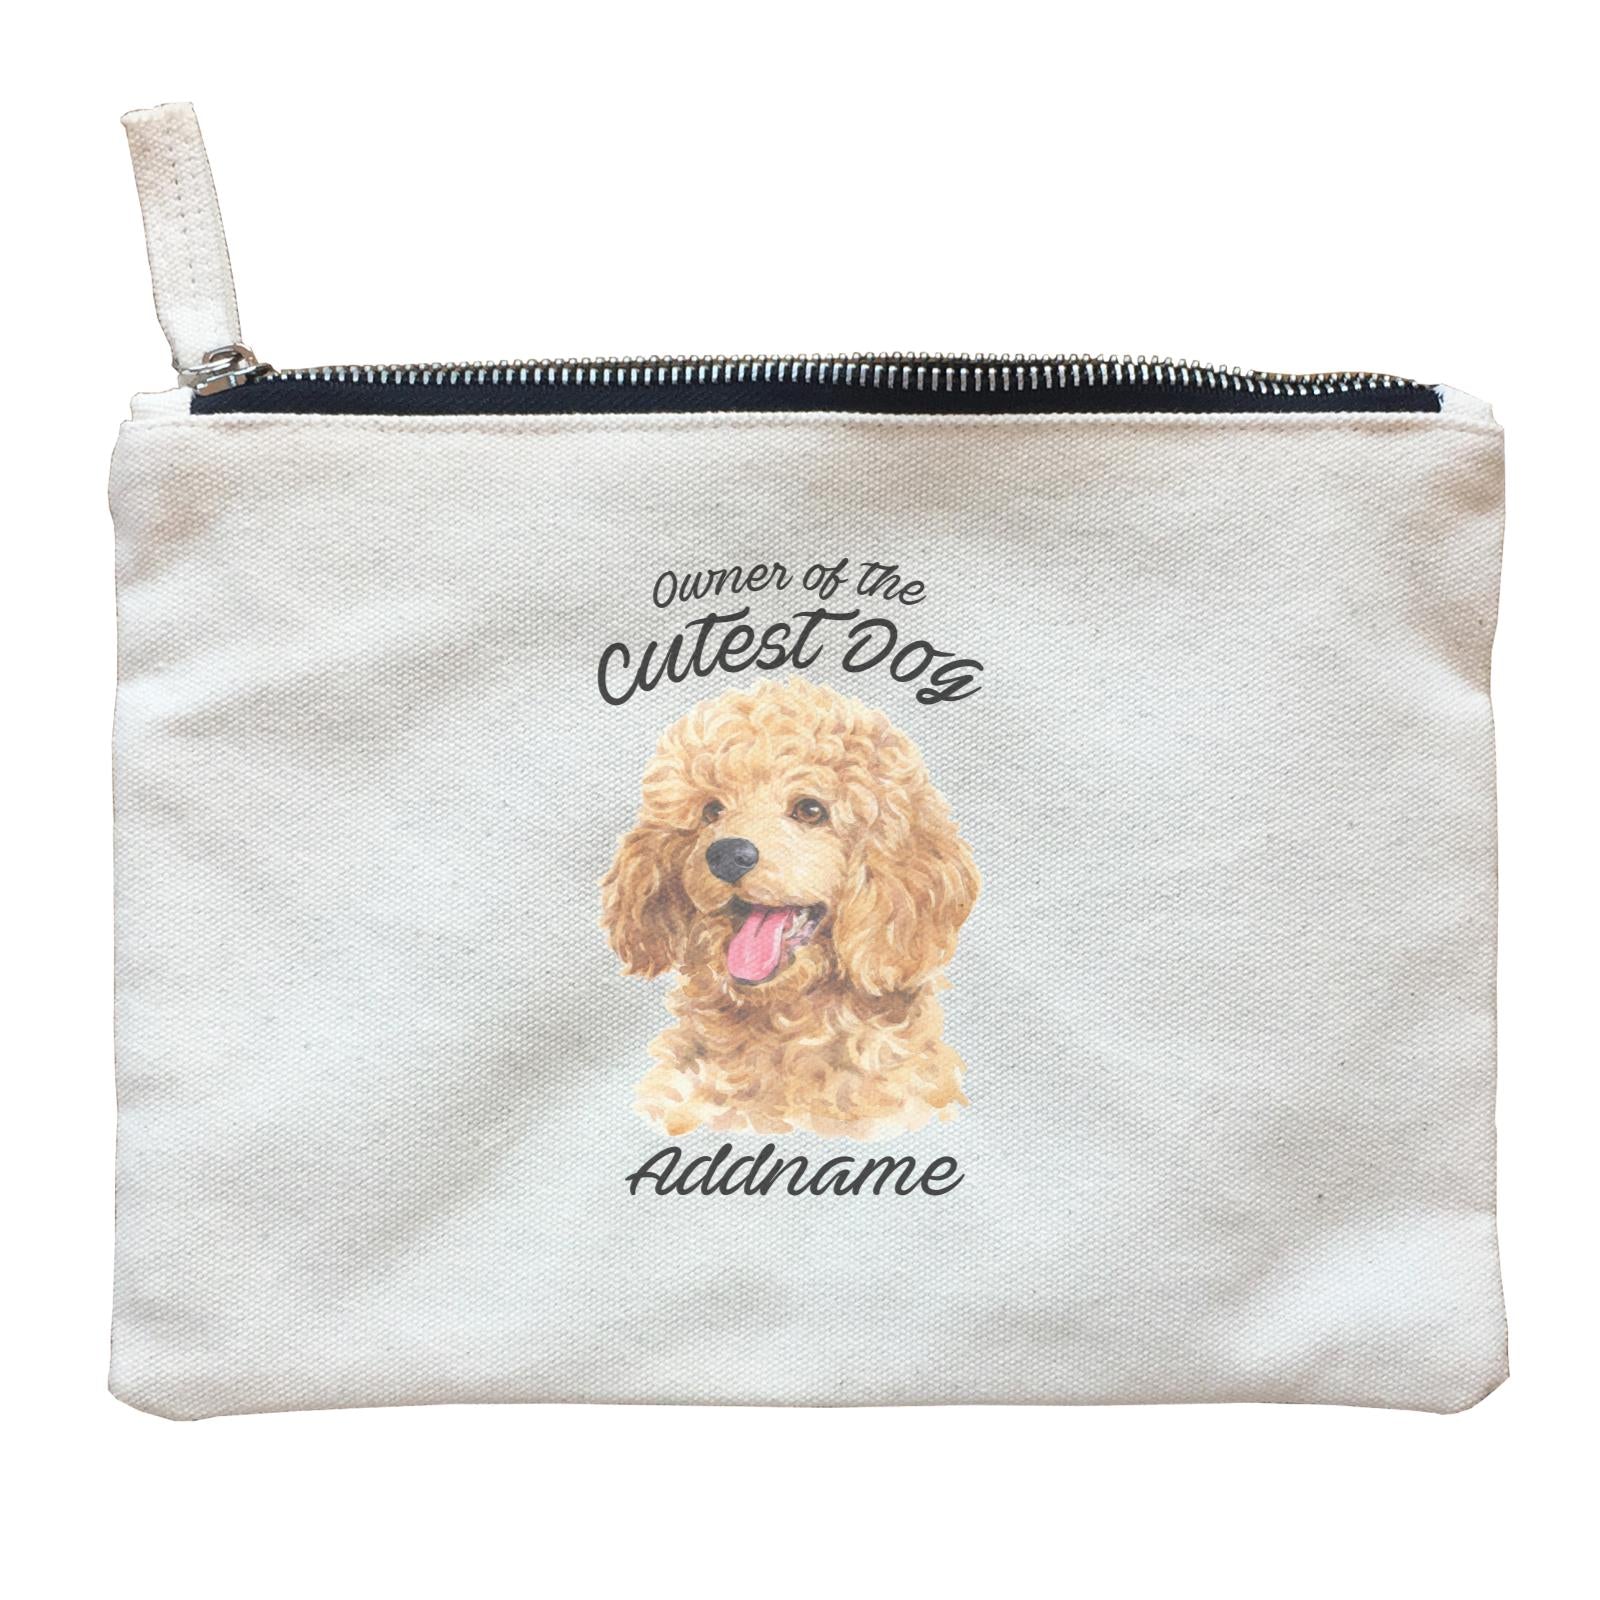 Watercolor Dog Owner Of The Cutest Dog Poodle Gold Addname Zipper Pouch